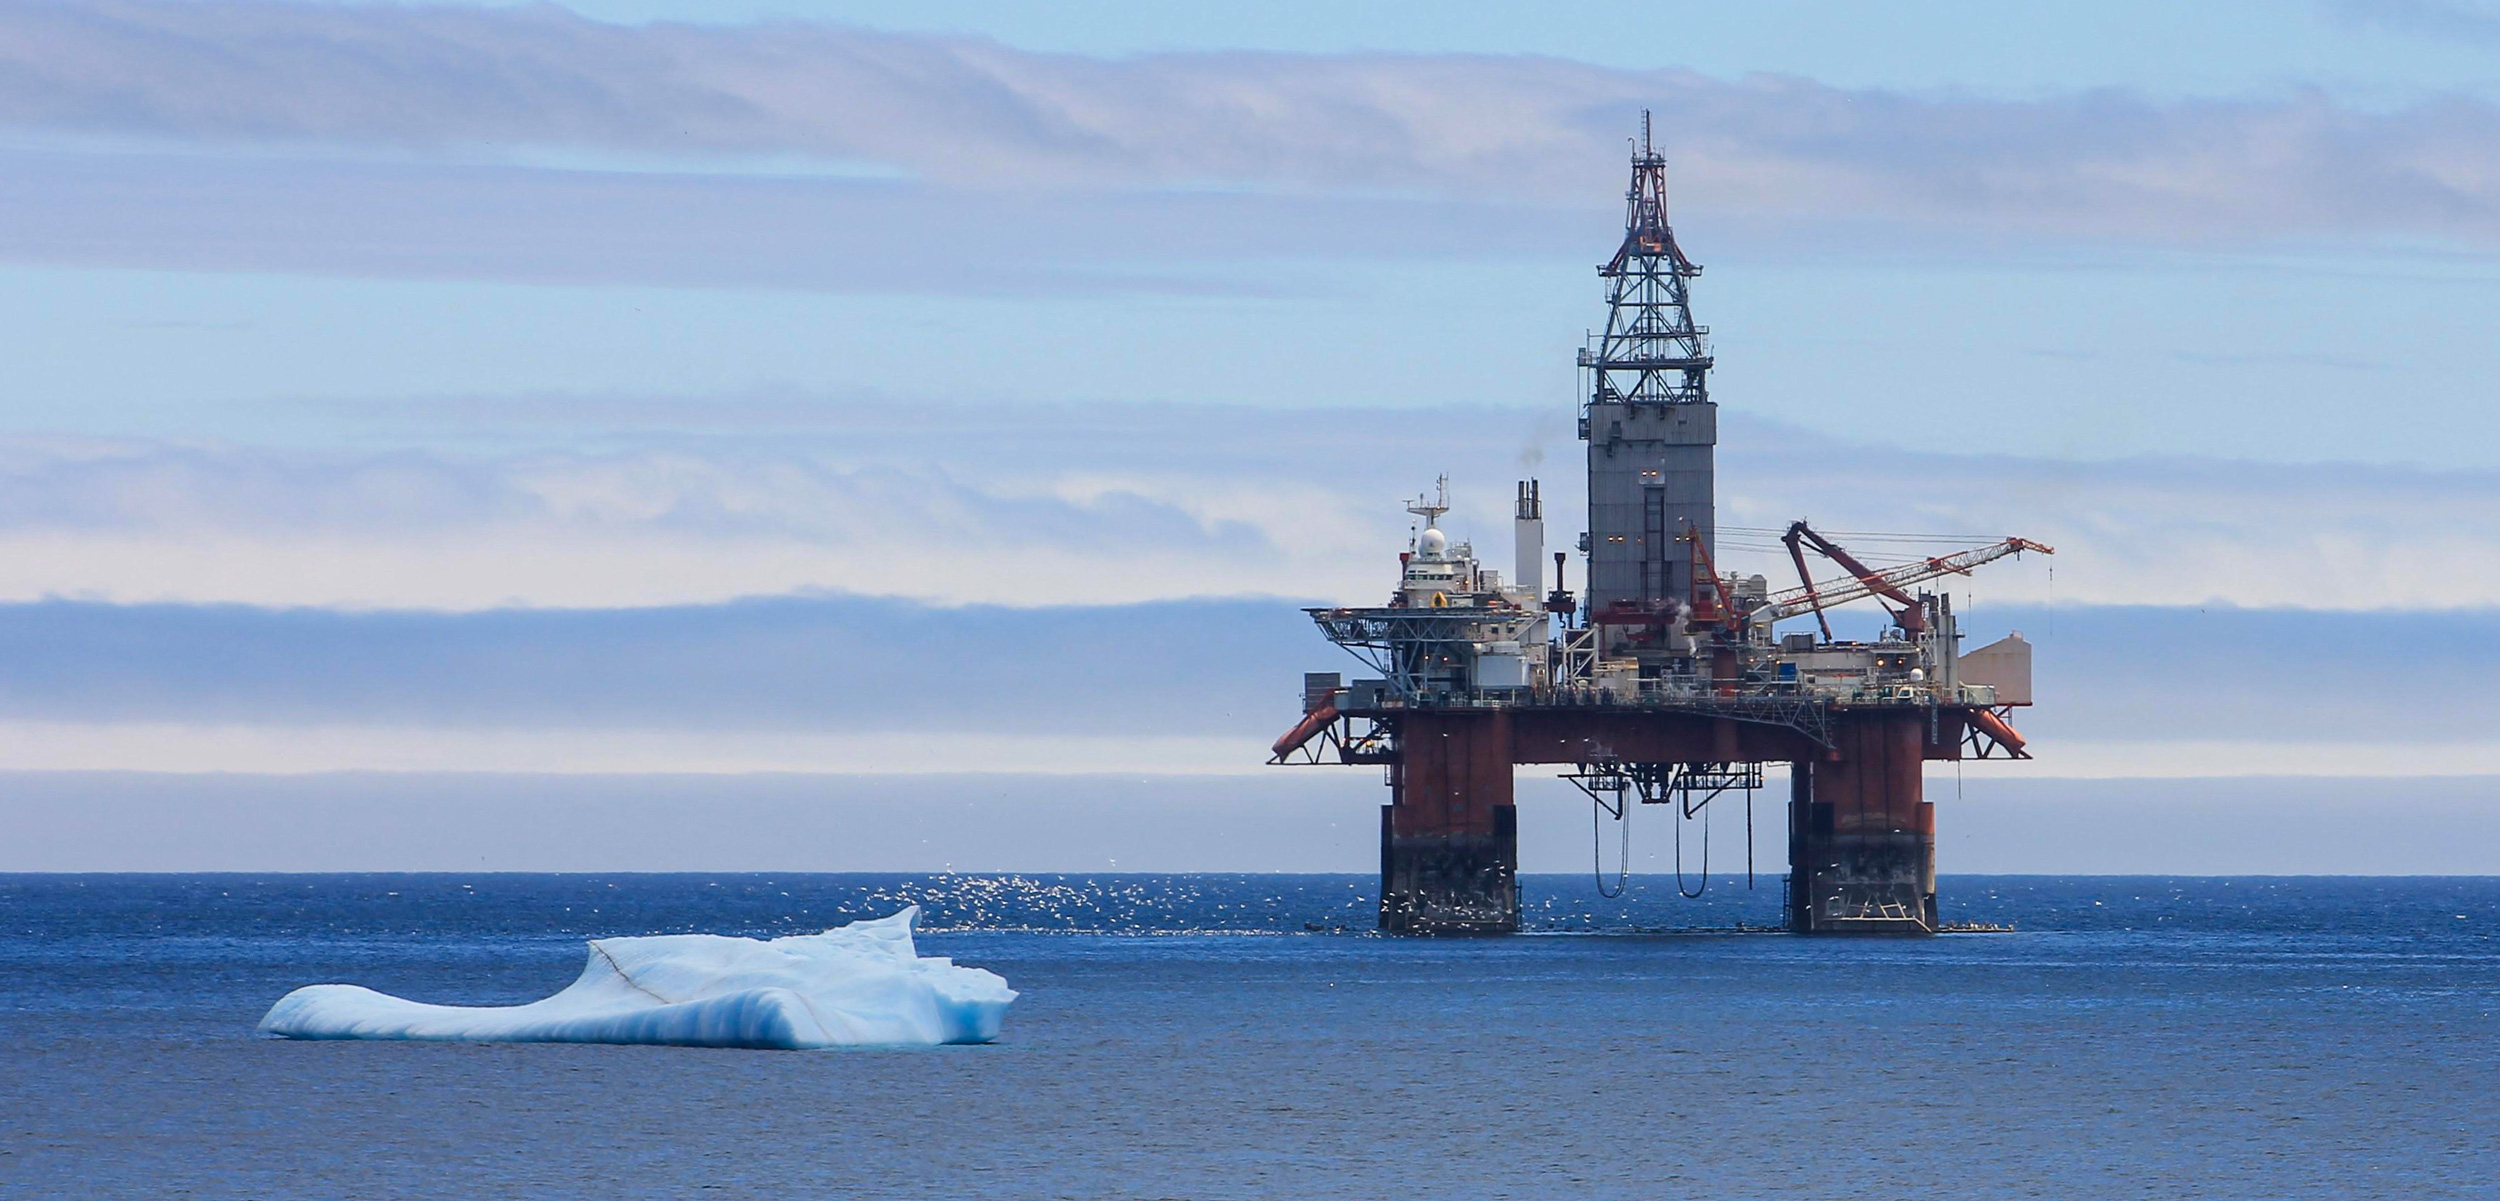 An Iceberg floating by an oil rig, Newfoundland and Labrador, Canada